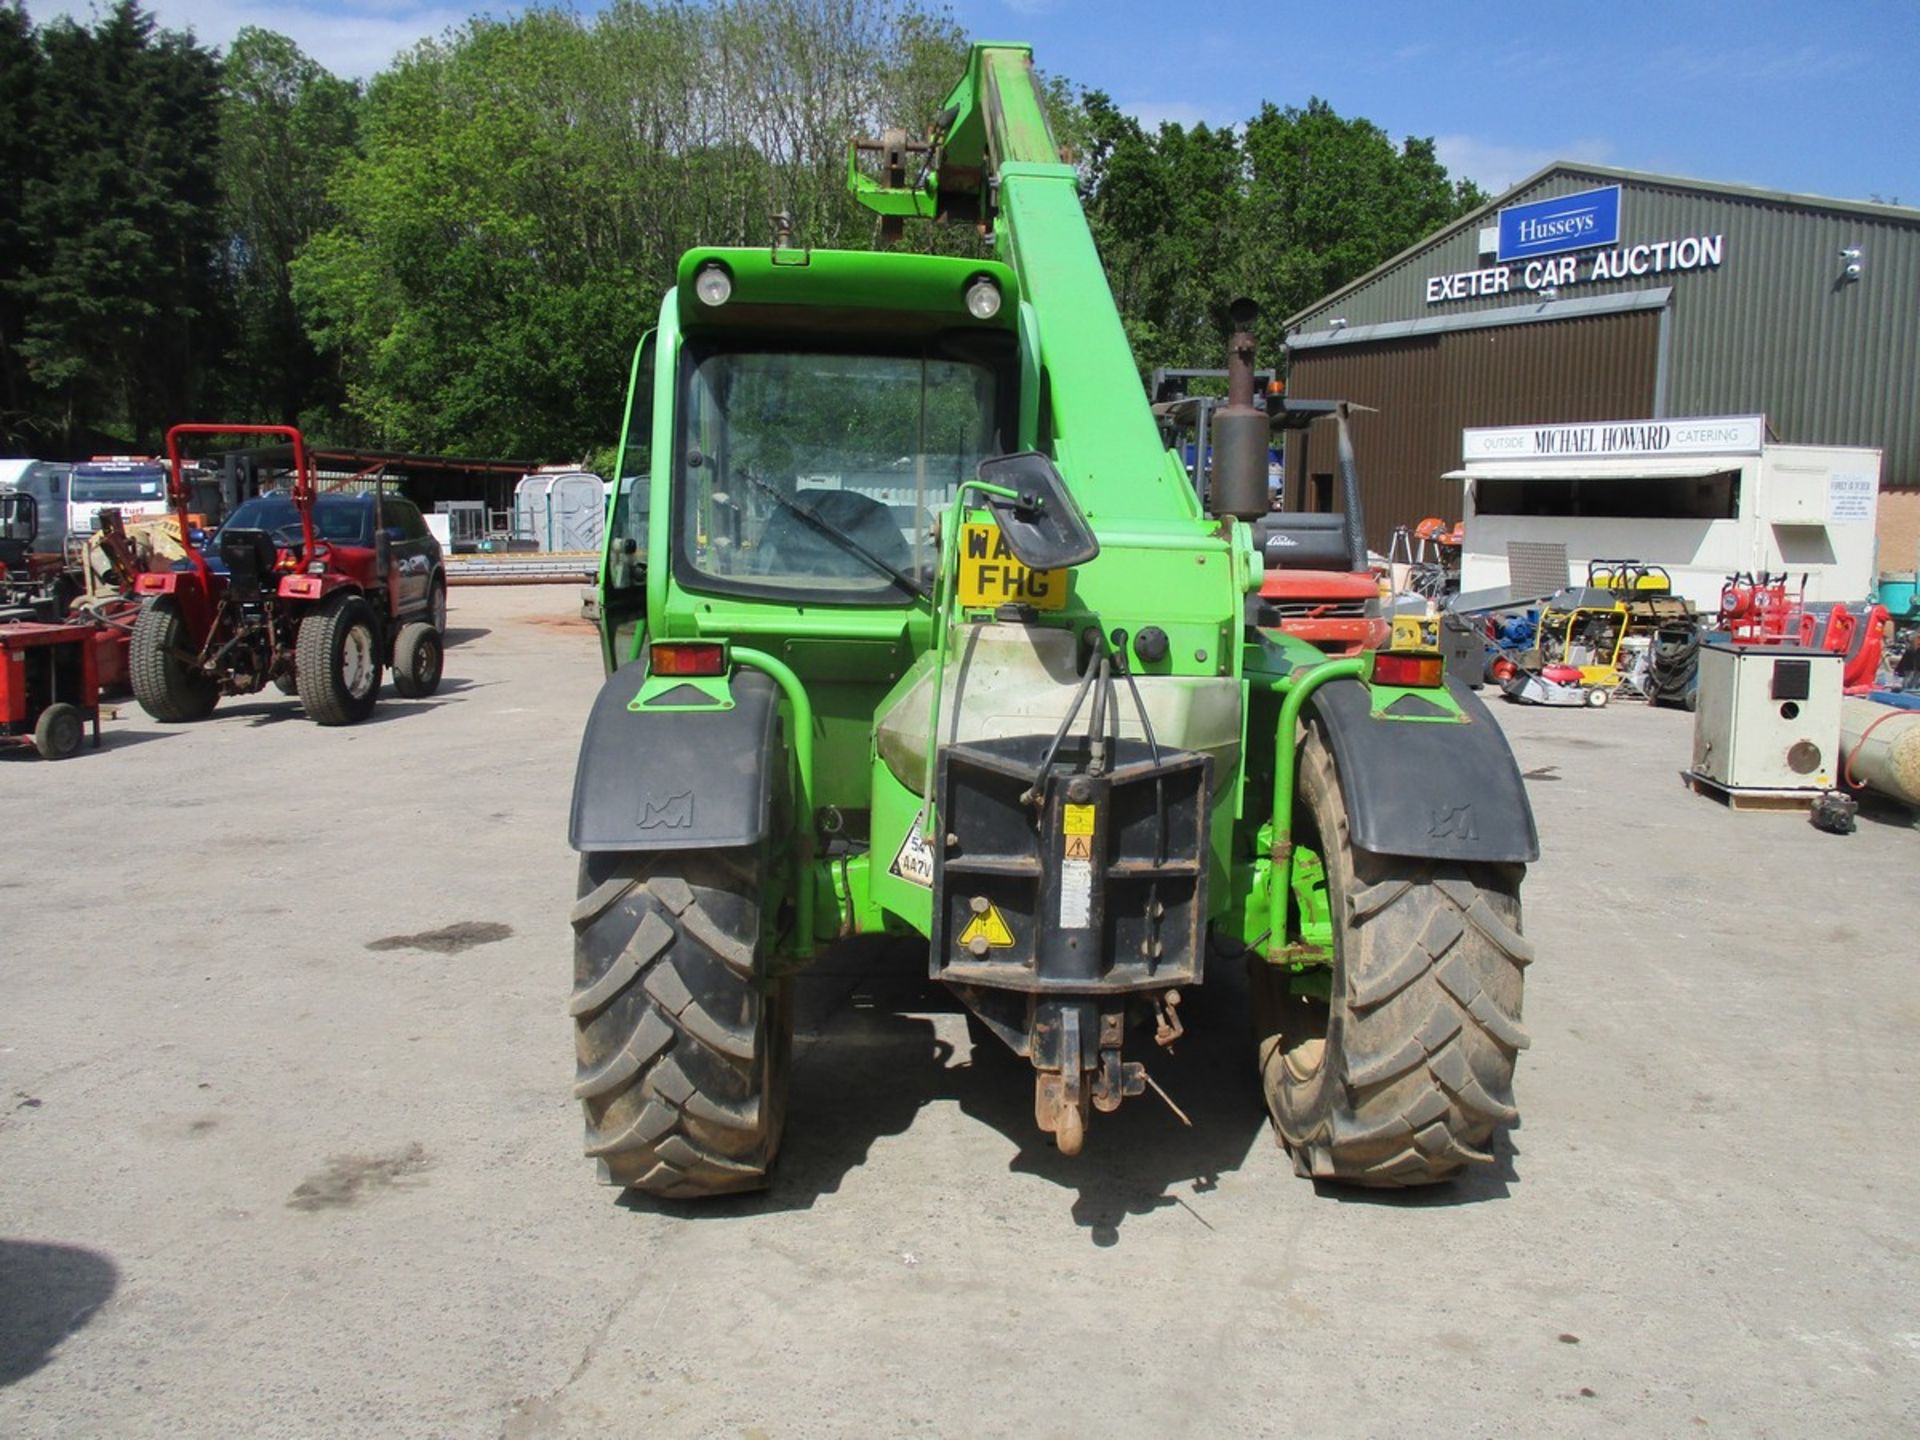 MERLO P326 PLUS TELEHANDLER (YR 2008) 6138HRS SHOWING,WA58FHG, 2 OWNERS, V5 - Image 3 of 7